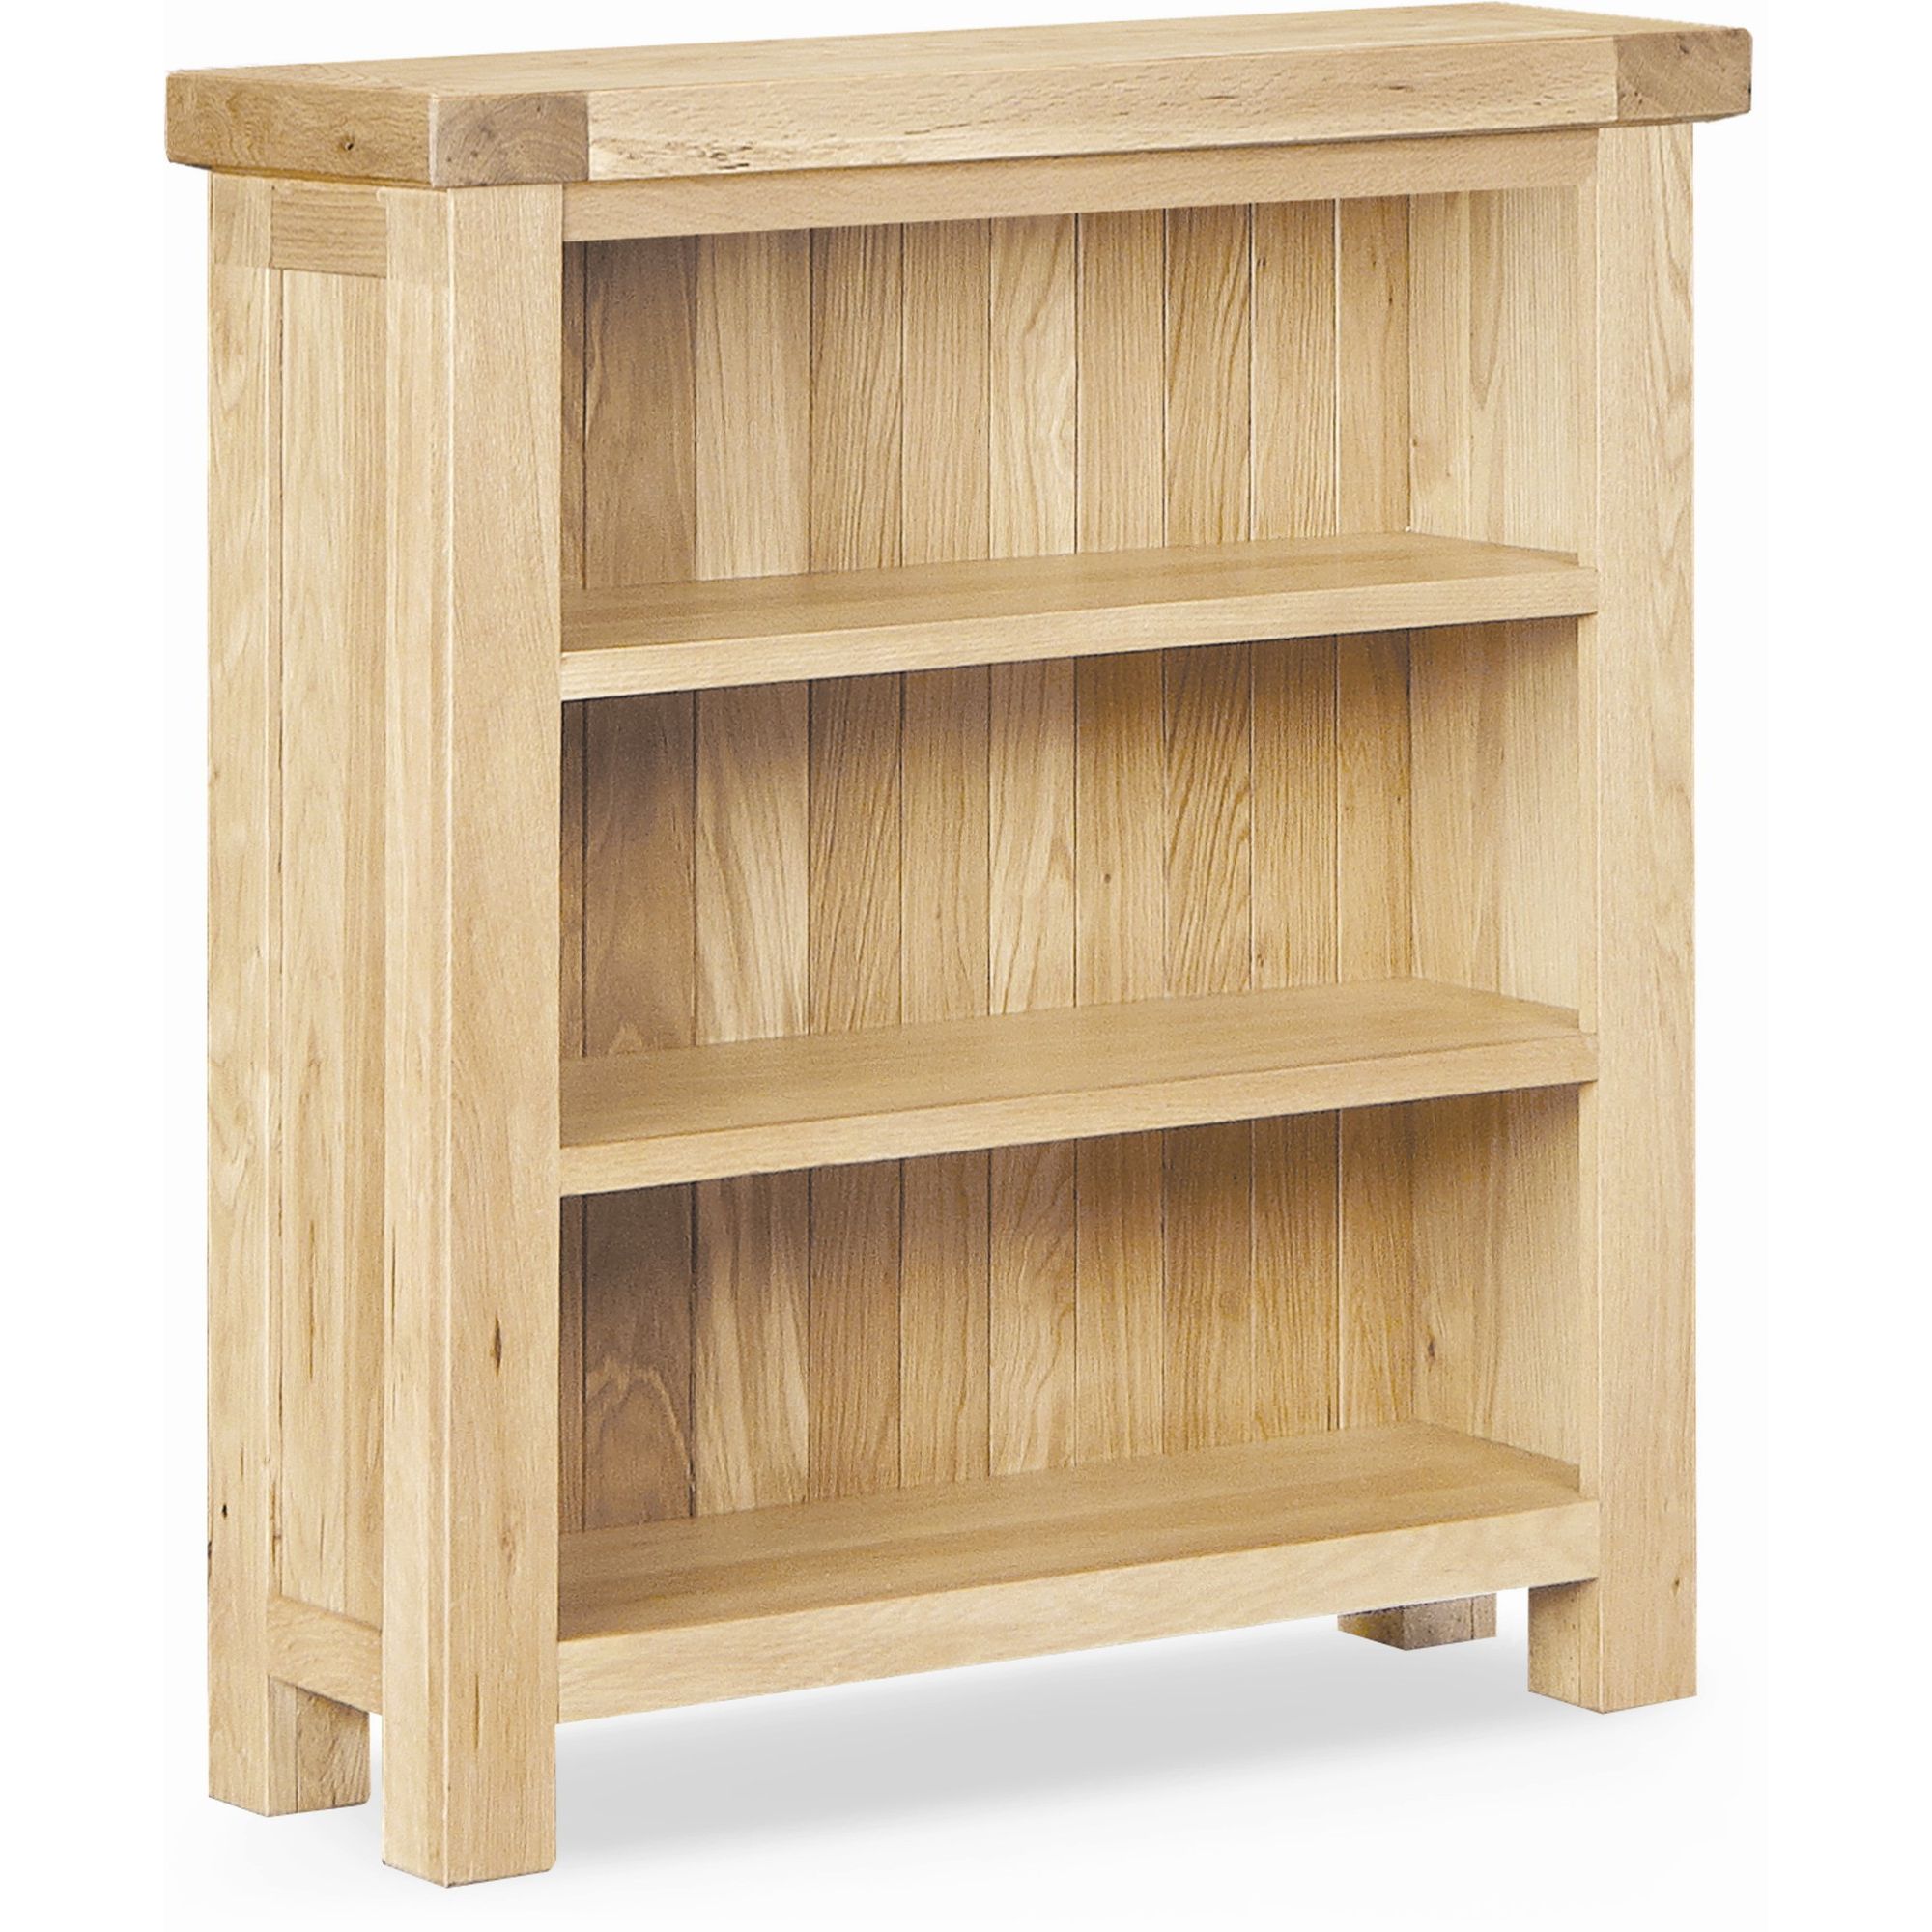 Alterton Furniture Chatsworth Low Bookcase at Tesco Direct